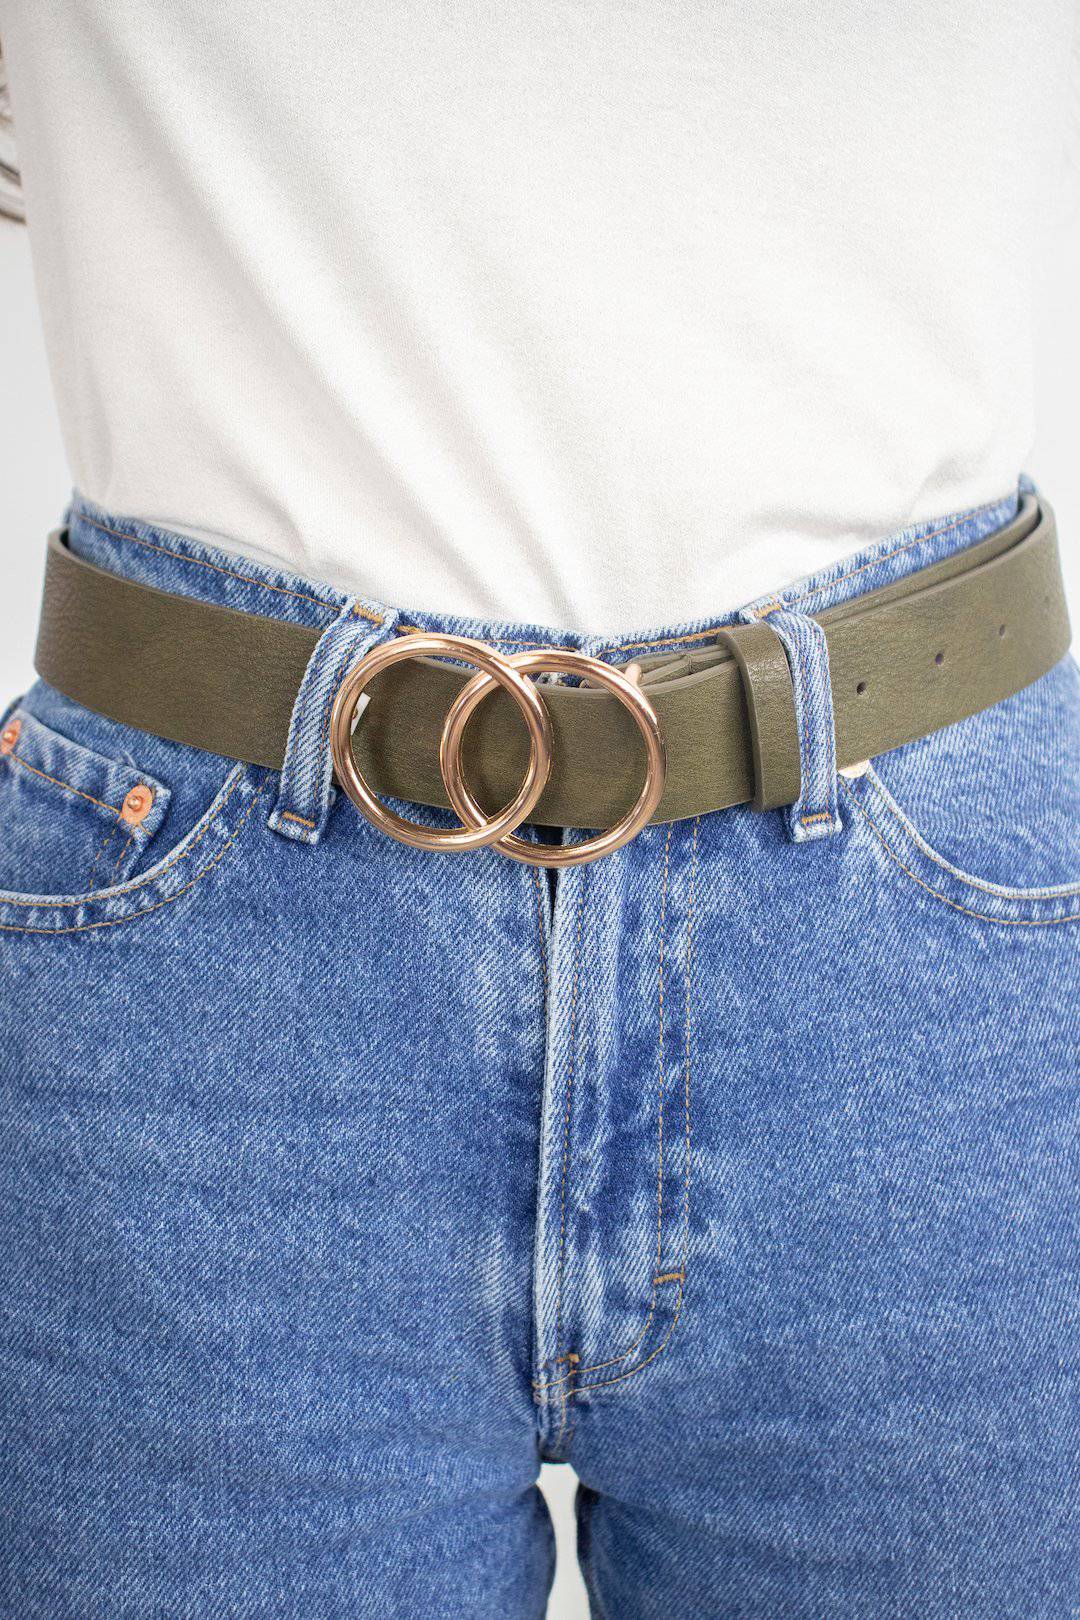 Small Olive OO Belt - Select Trends Boutique